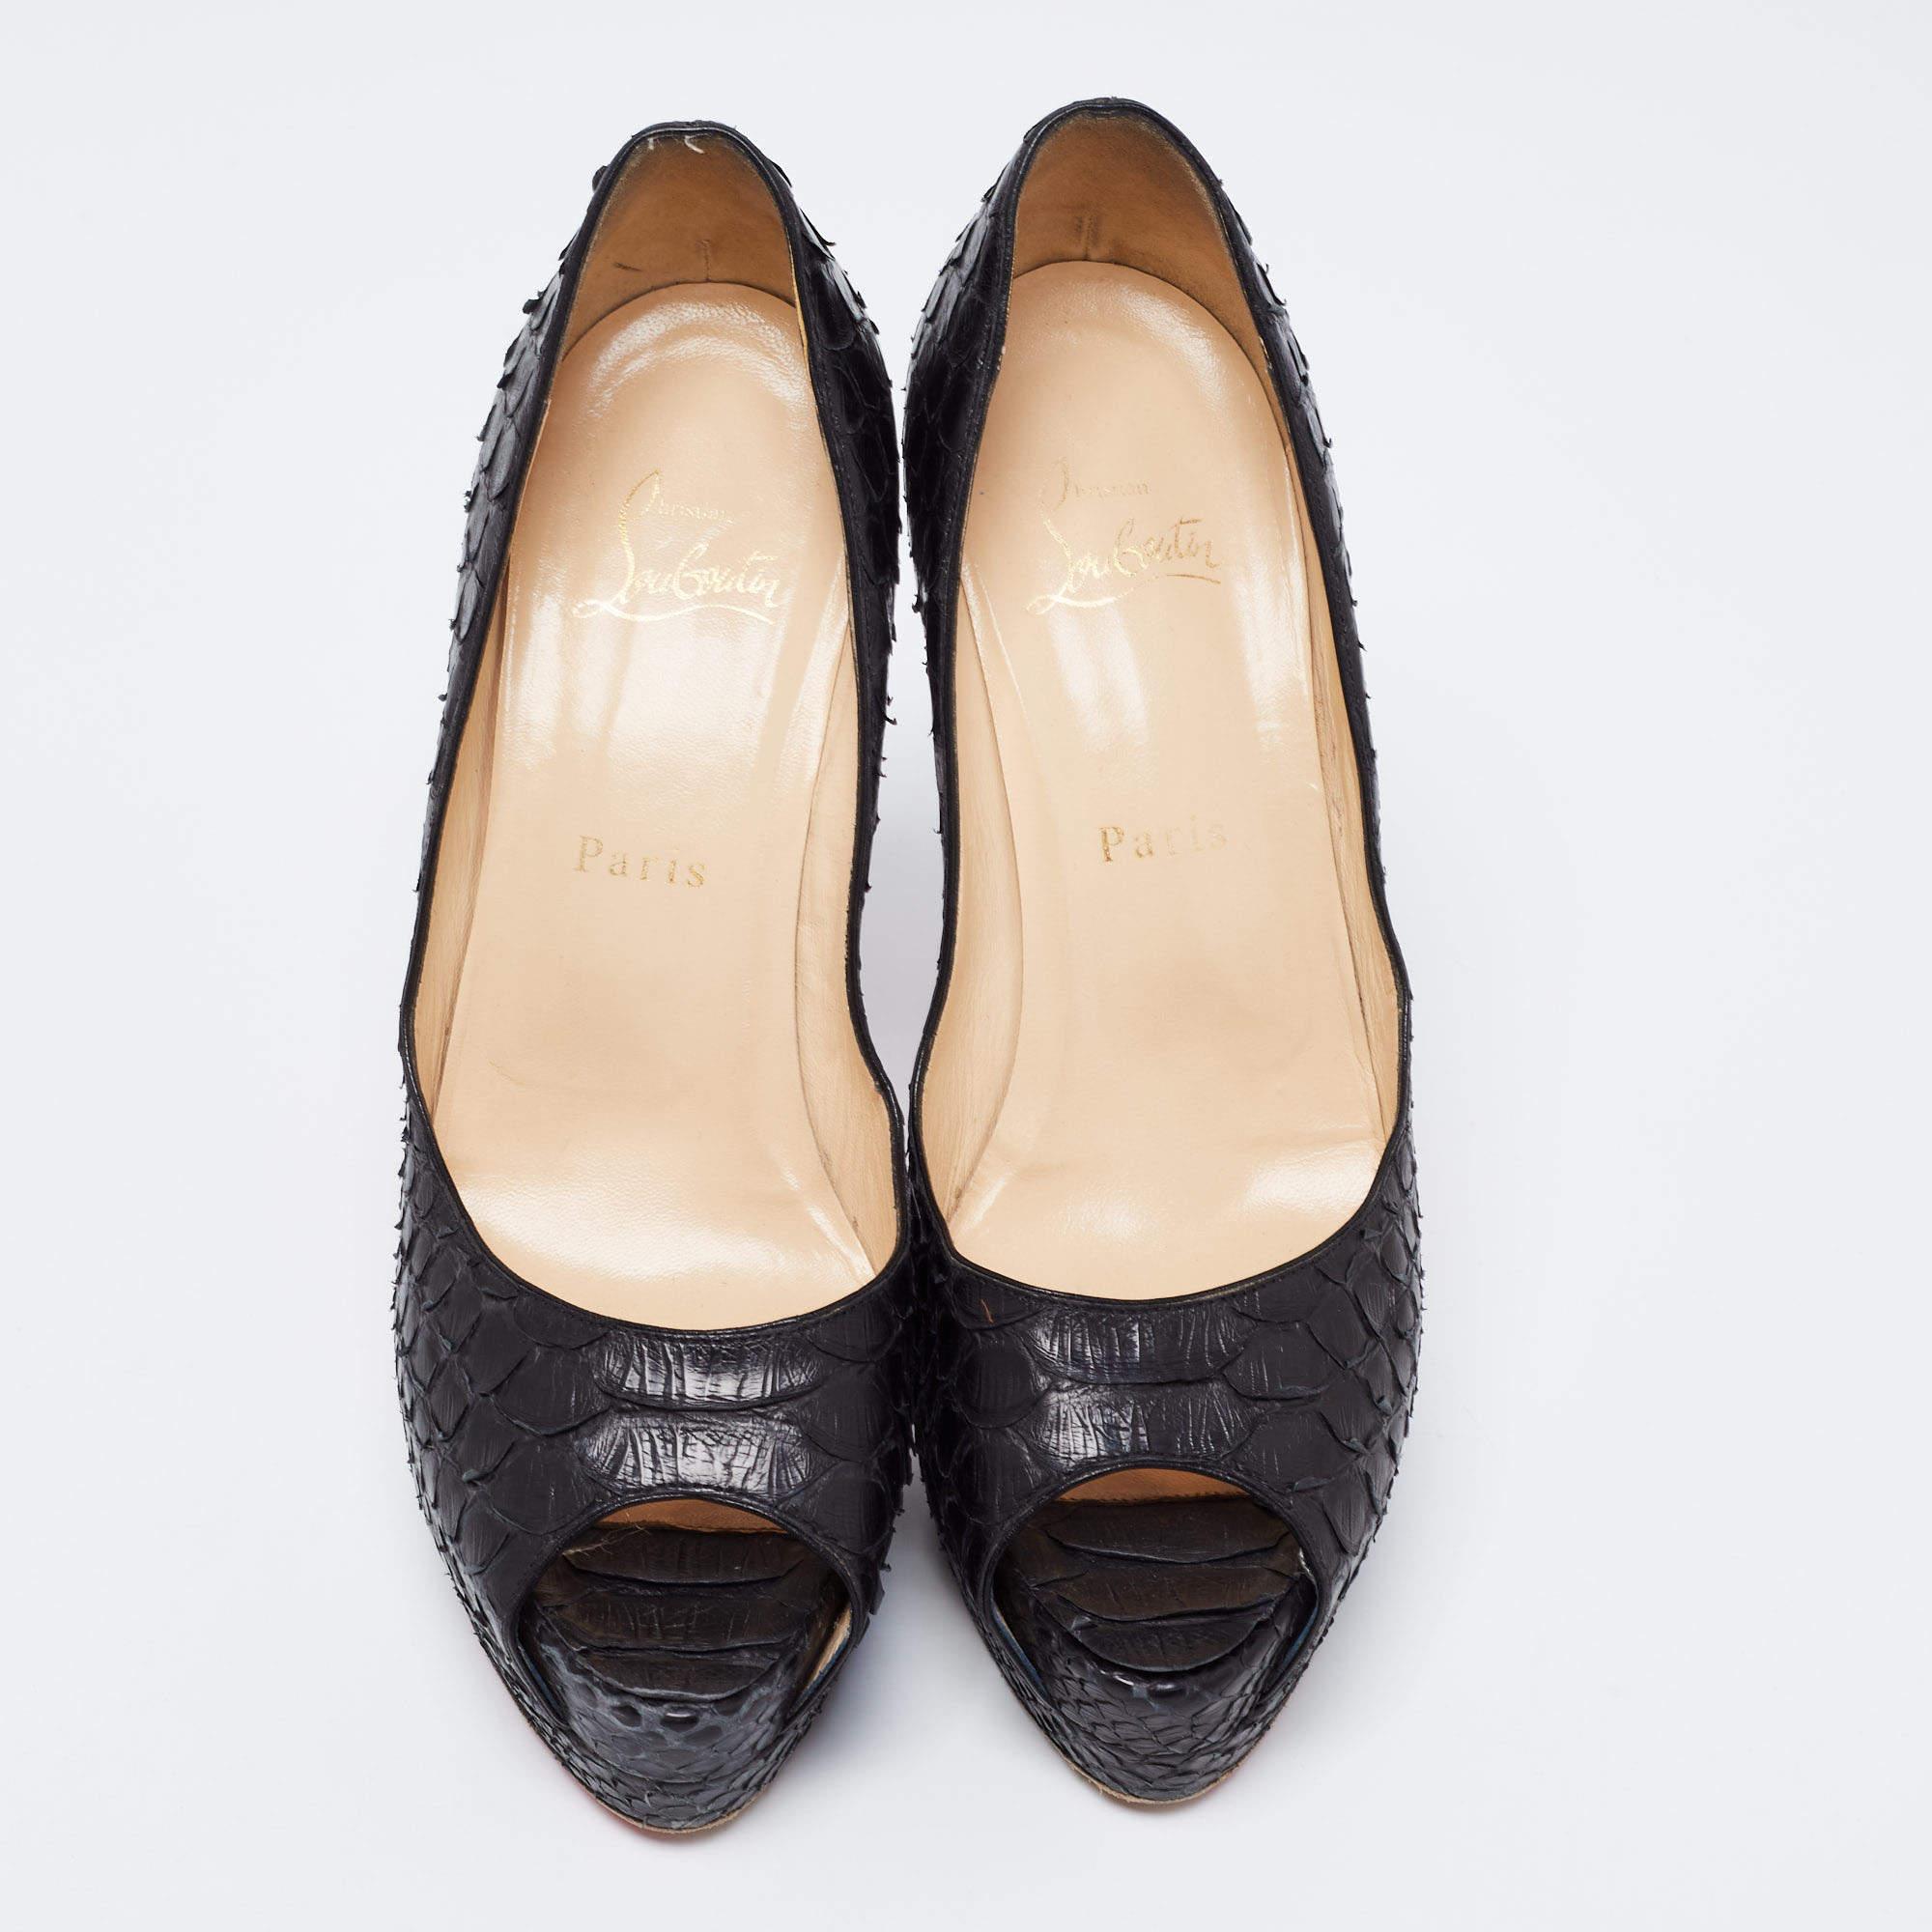 This stunning pair of Altadama pumps from Christian Louboutin are sure to add elegance to your outfits. The peep-toe pumps have been crafted from black python leather, and they come with comfortable insoles. They are complete with 13 cm heels,